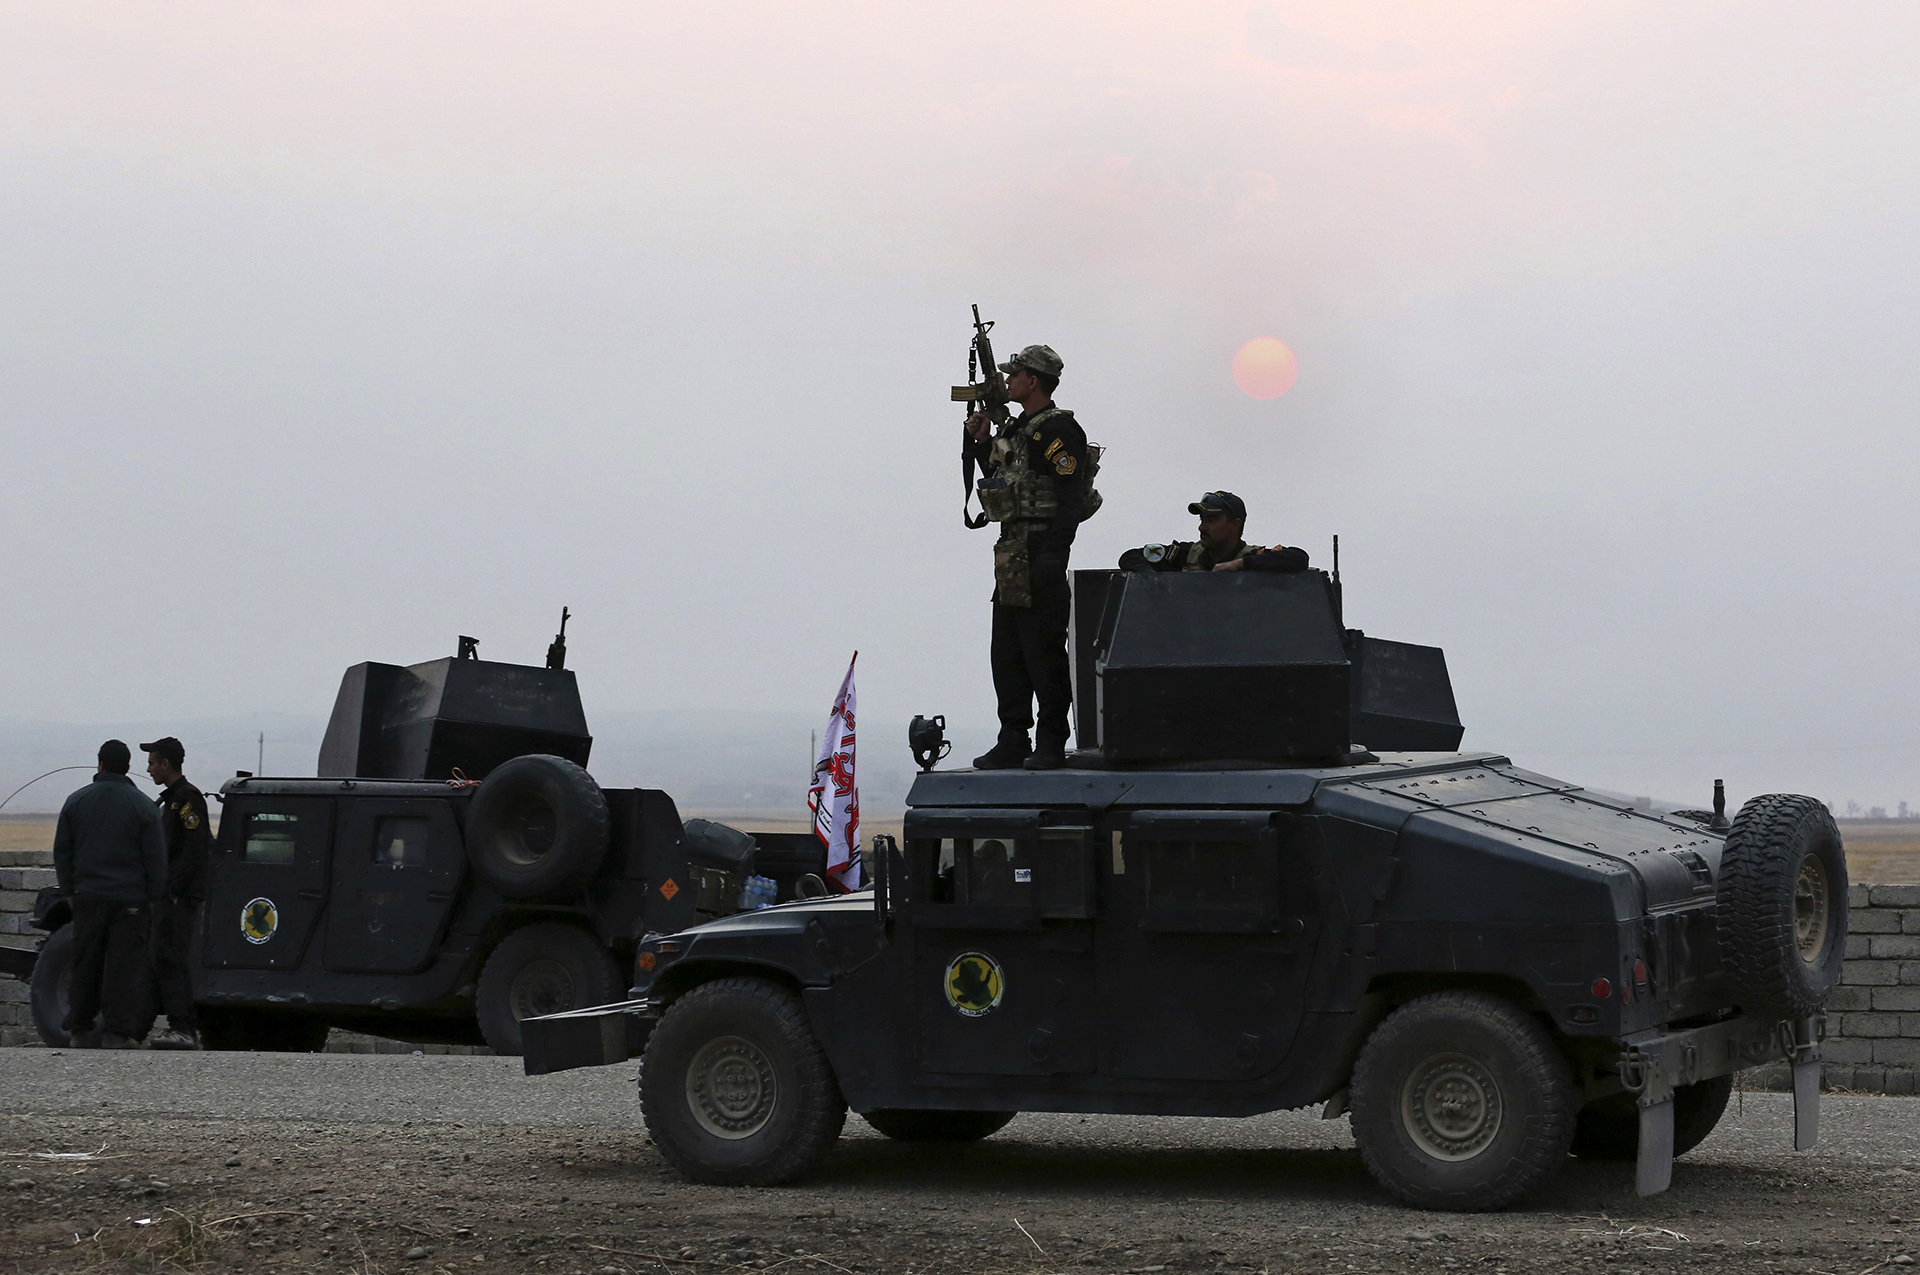 Iraq's elite counterterrorism forces prepare to attack Islamic State positions as fighting to retake the extremist-held city of Mosul entered its second week, in the village of Tob Zawa, outside Mosul, Monday, Oct. 24, 2016. (AP Photo/Khalid Mohammed)